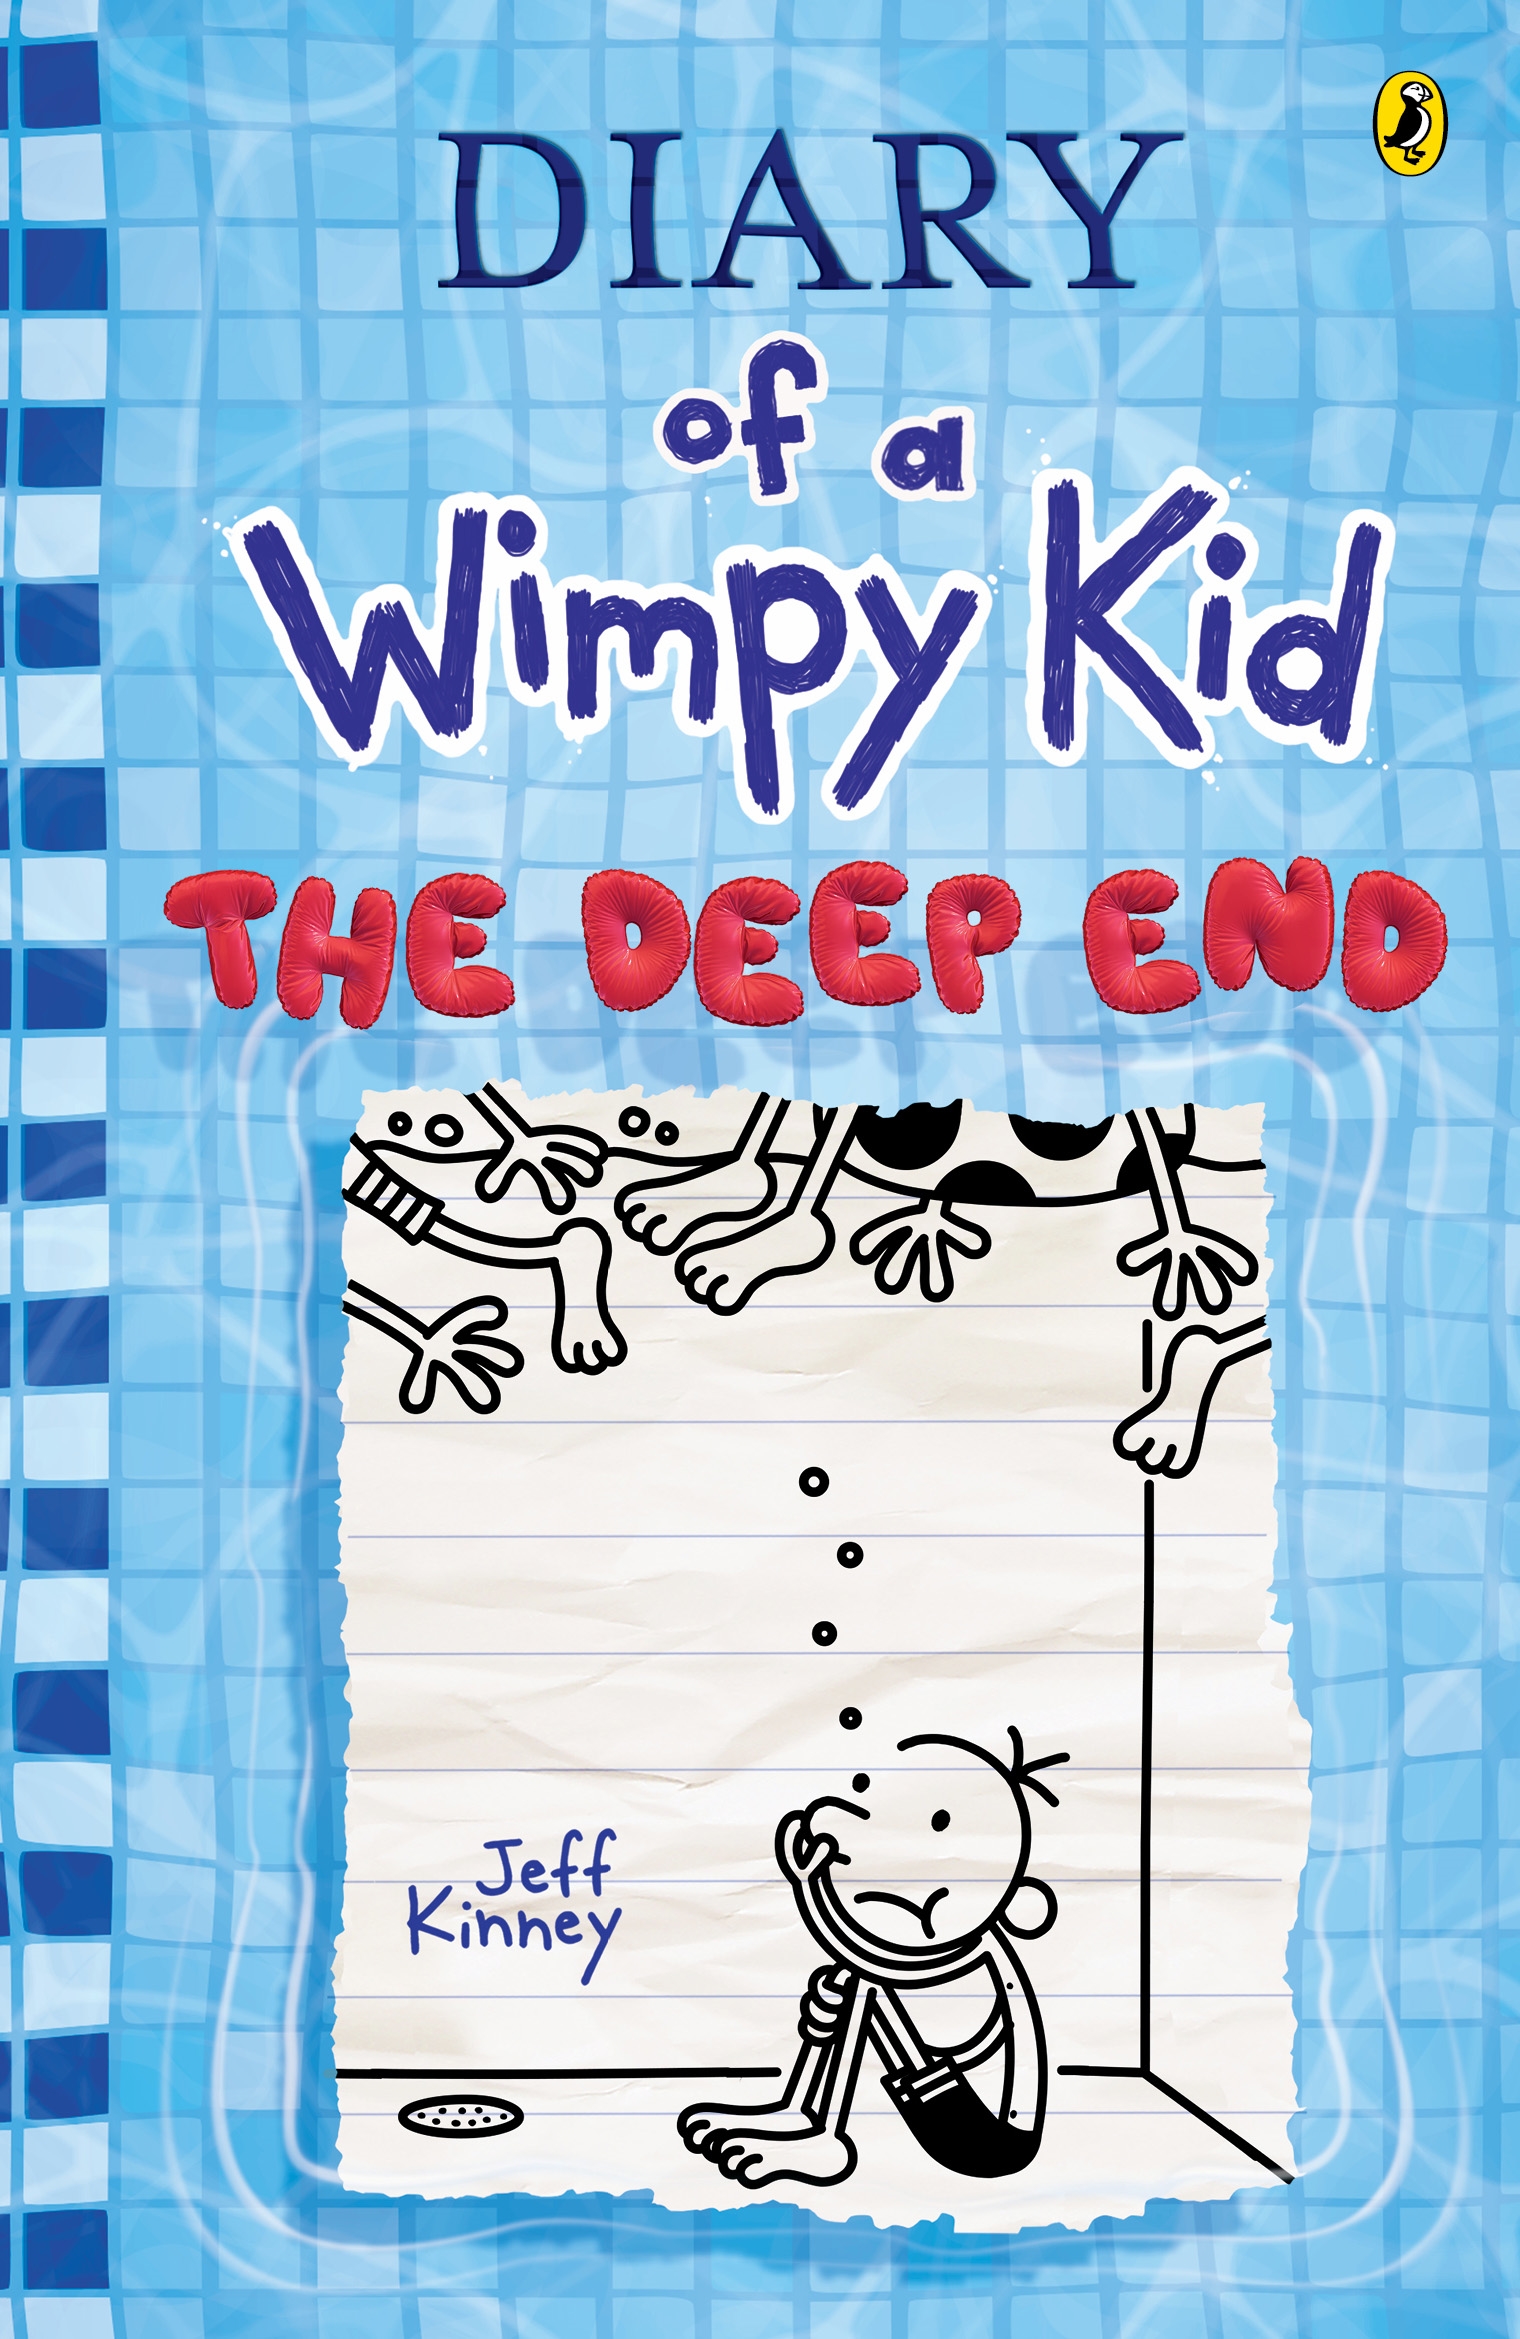 Greg Heffley from Diary of a Wimpy Kid